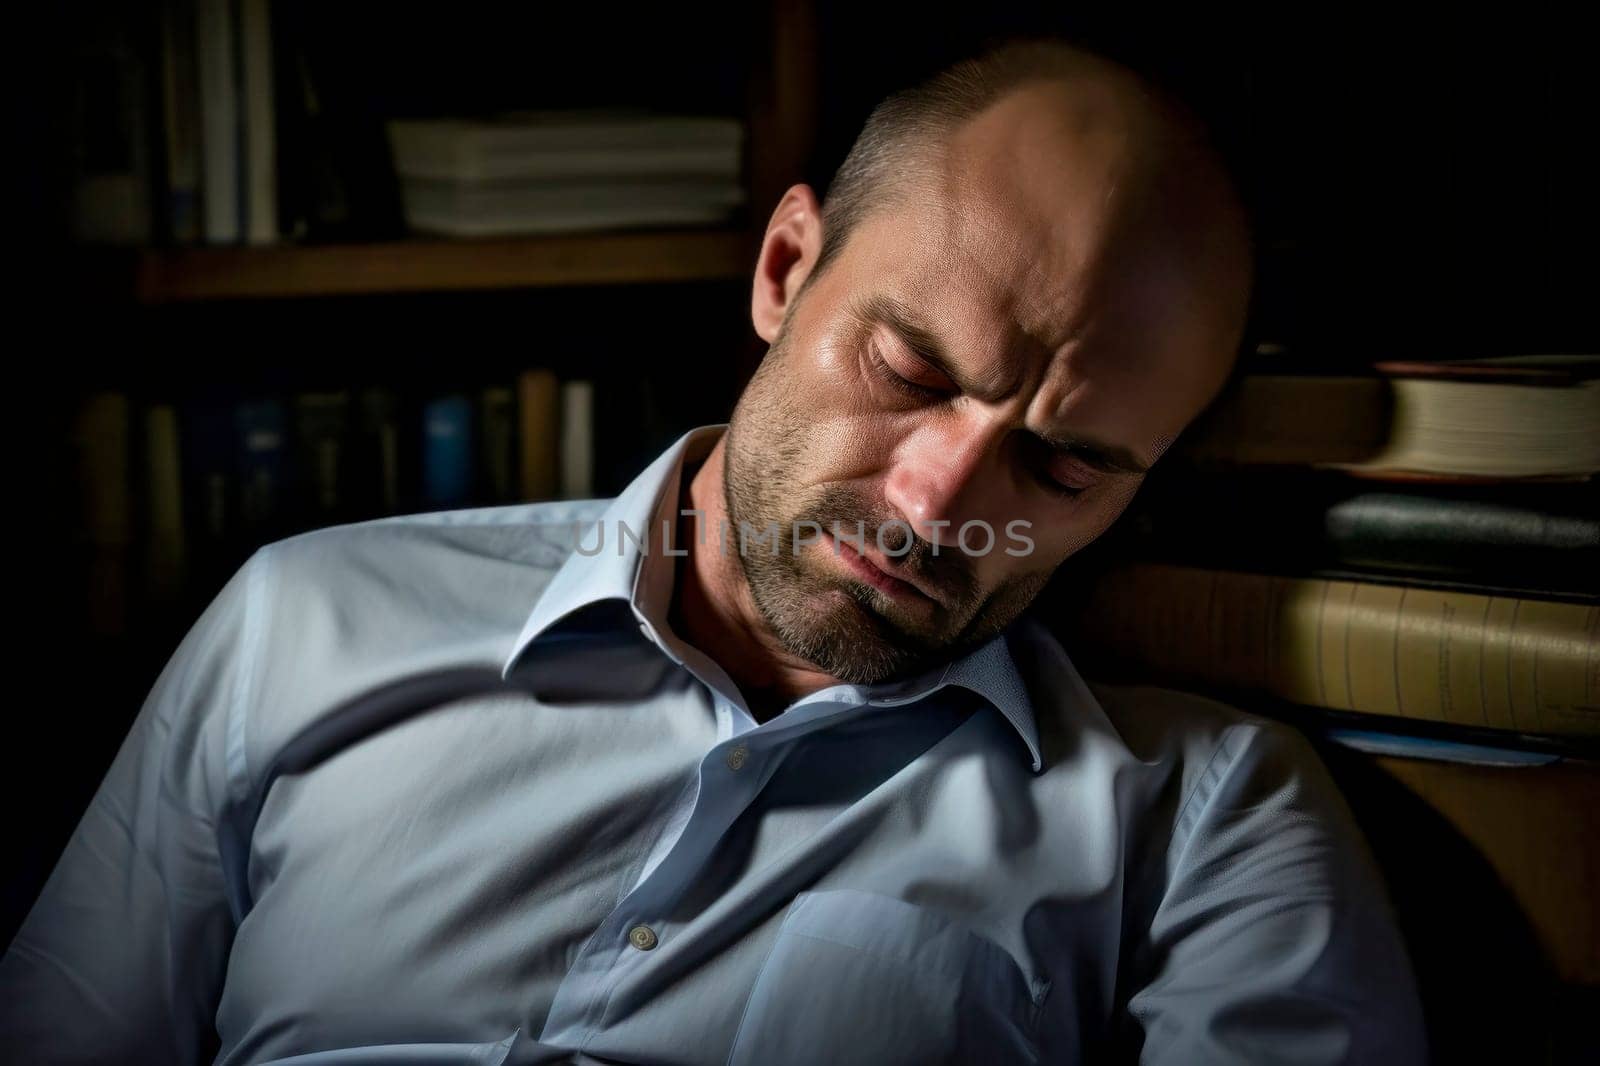 A tranquil image capturing a close-up of a man peacefully asleep amidst the books in a library.